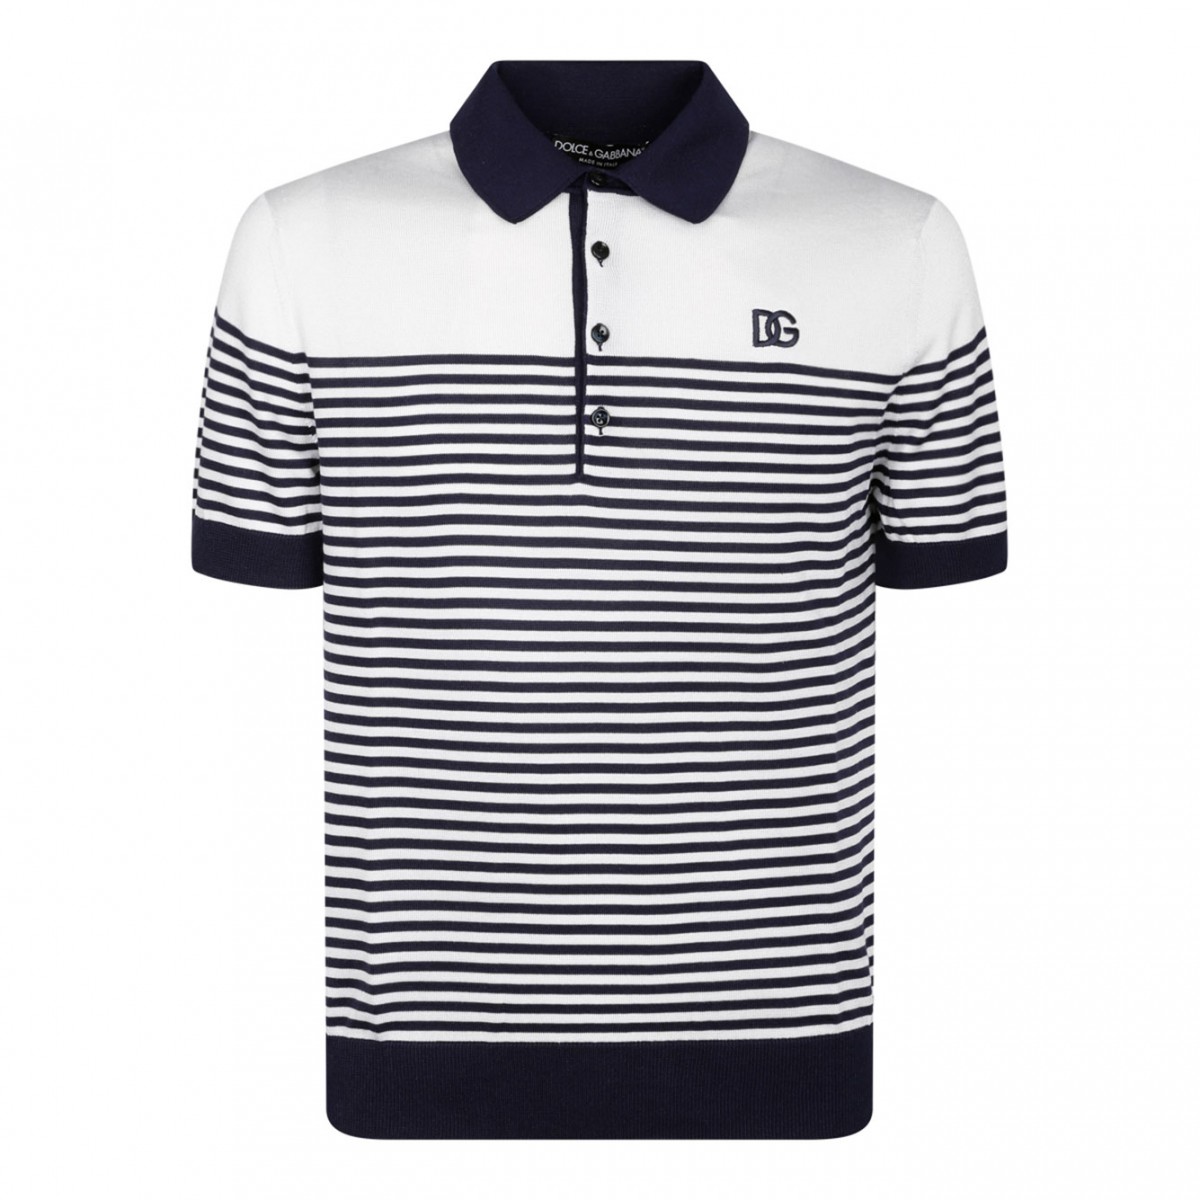 White and Blue Striped Polo Shirt